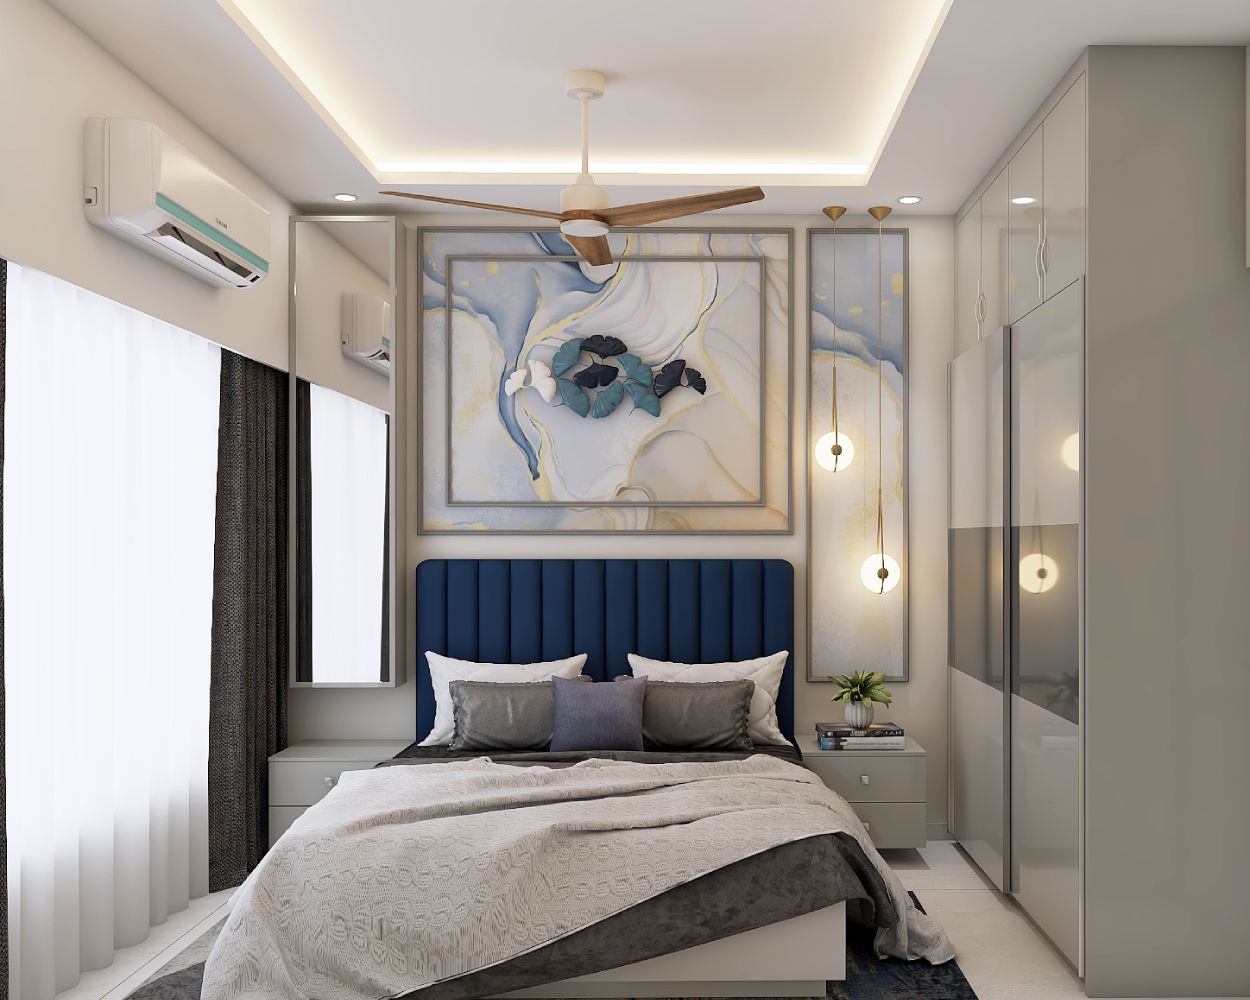 Modern Master Bedroom Design With Blue Panelled Headboard And Marble-Finish Wall Decor